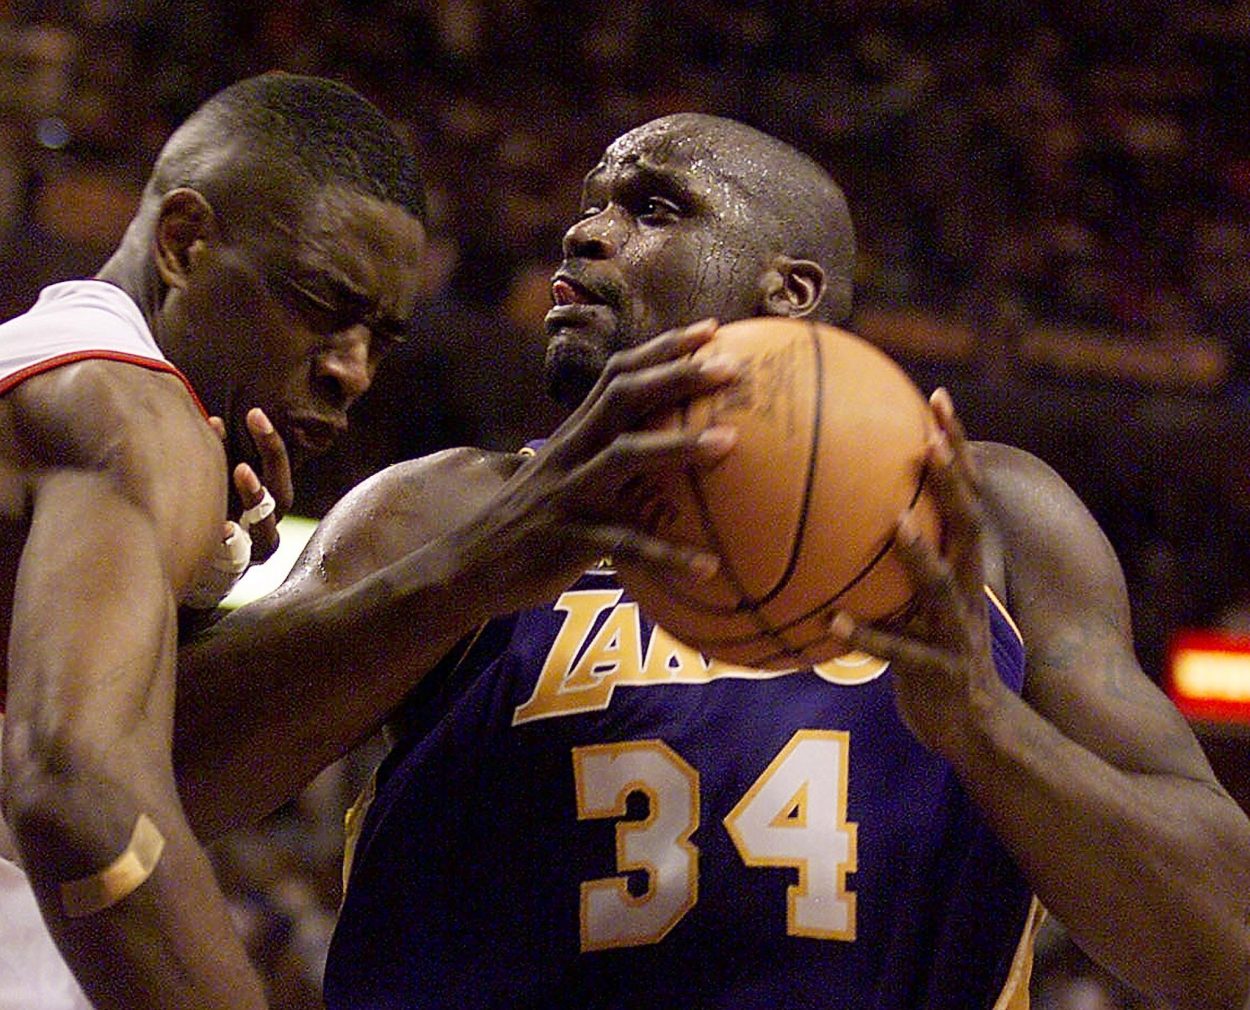 Former Lakers star Shaquille O'Neal backs into Dikembe Mutombo during the 2001 NBA Finals